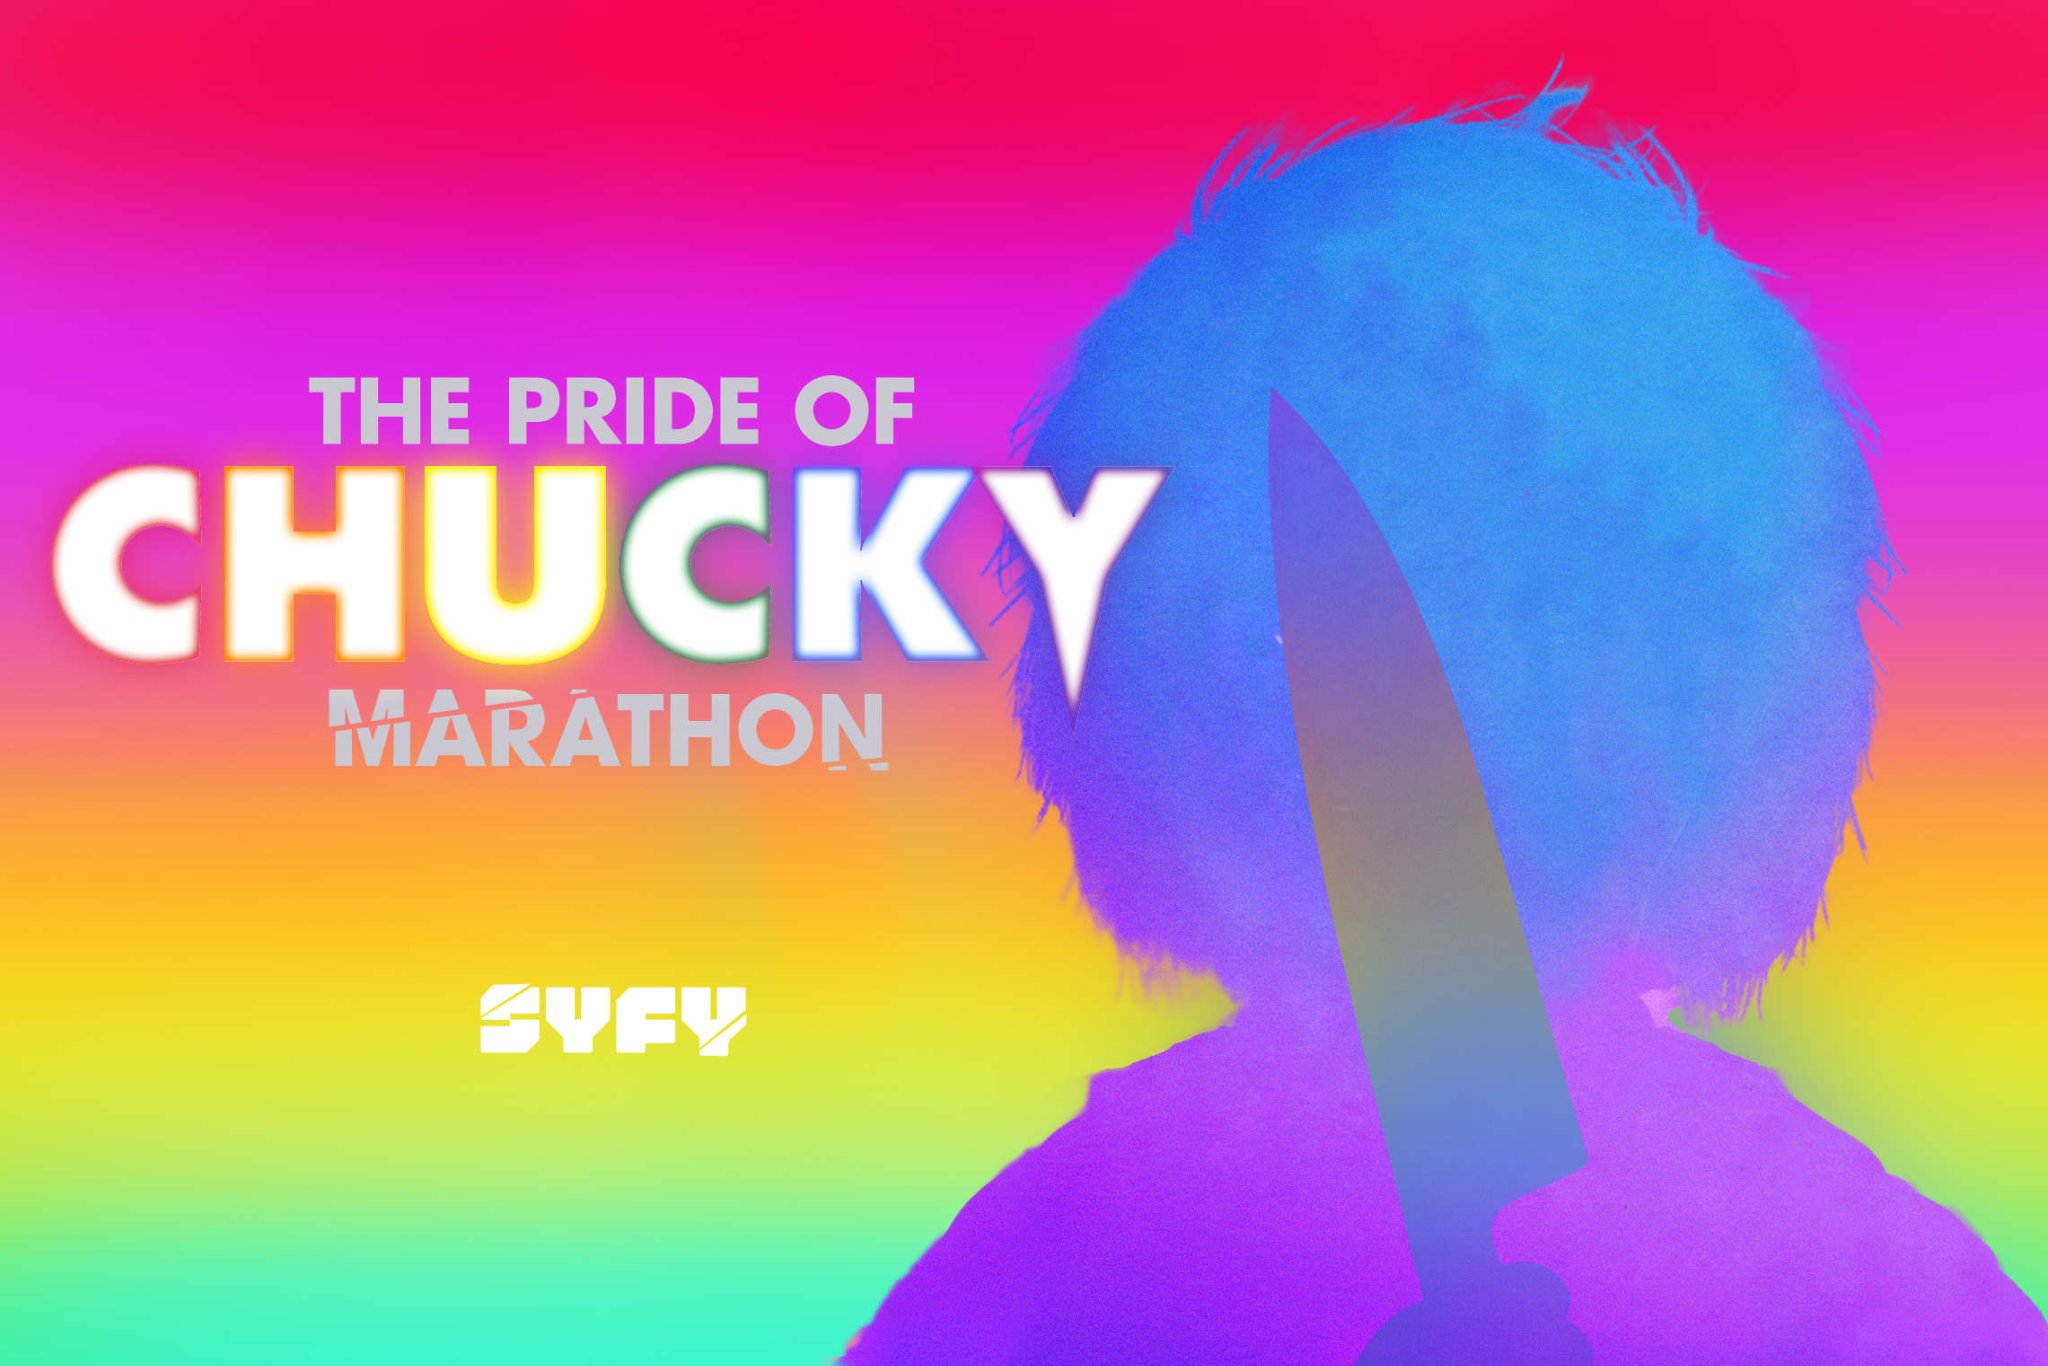 SYFY's 'The Pride of Chucky Marathon' is here to celebrate Pride Month and scare you silly